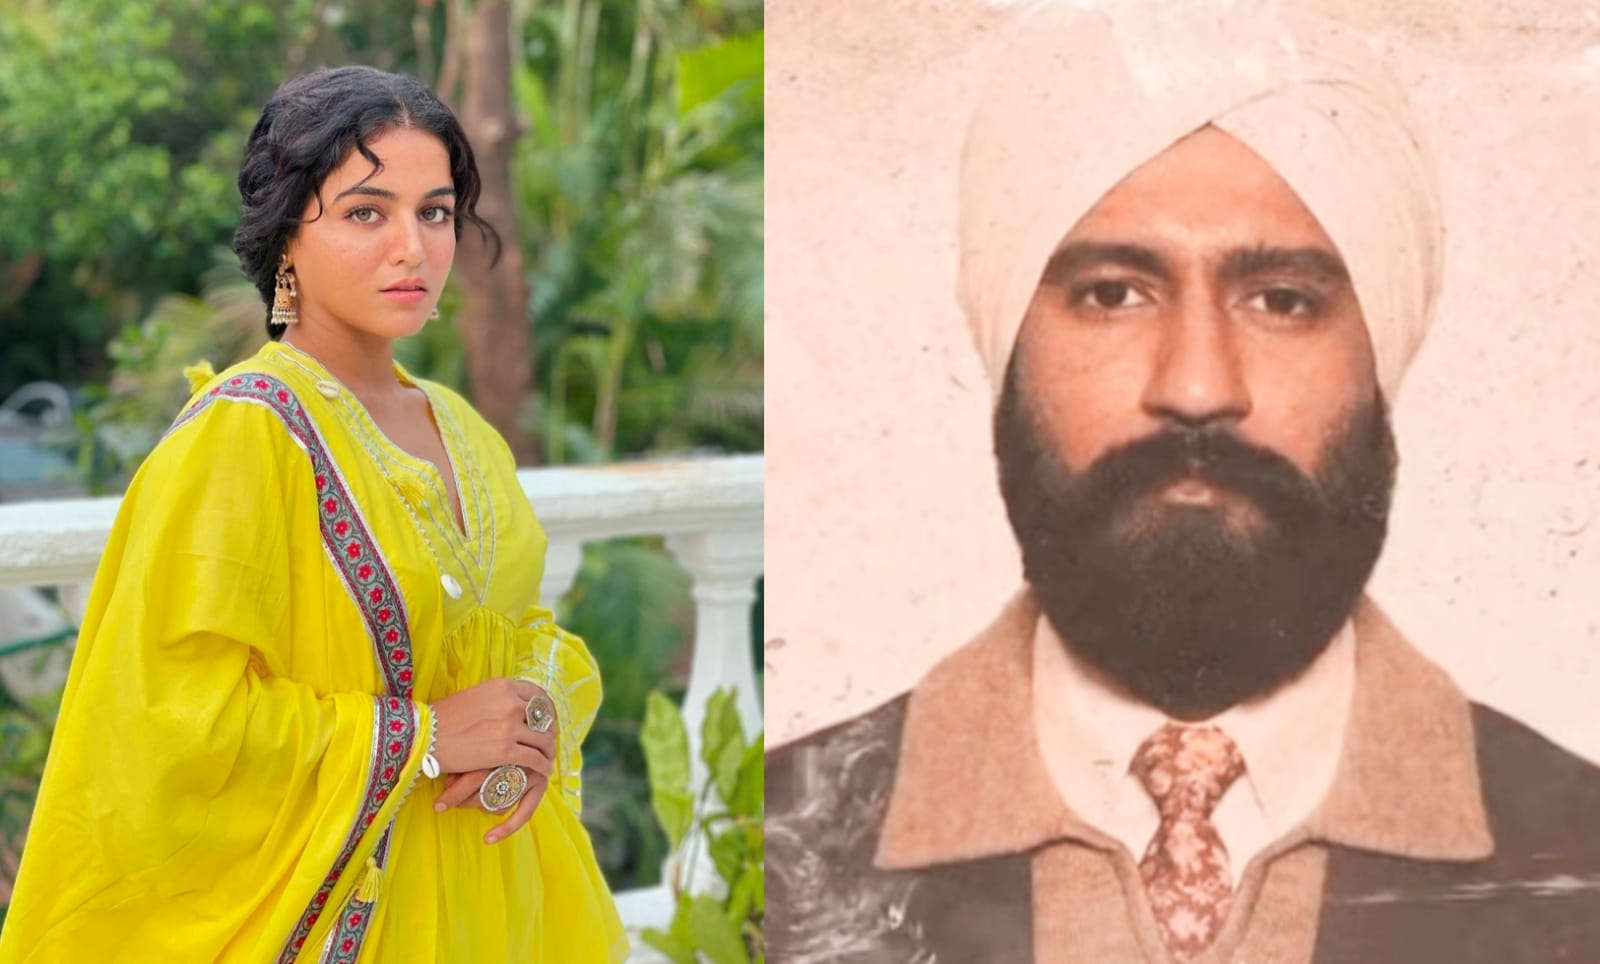 Wamiqa Gabbi is grateful the Shoojit Sircar gave Sardar Udham the true representation and justice his story deserved